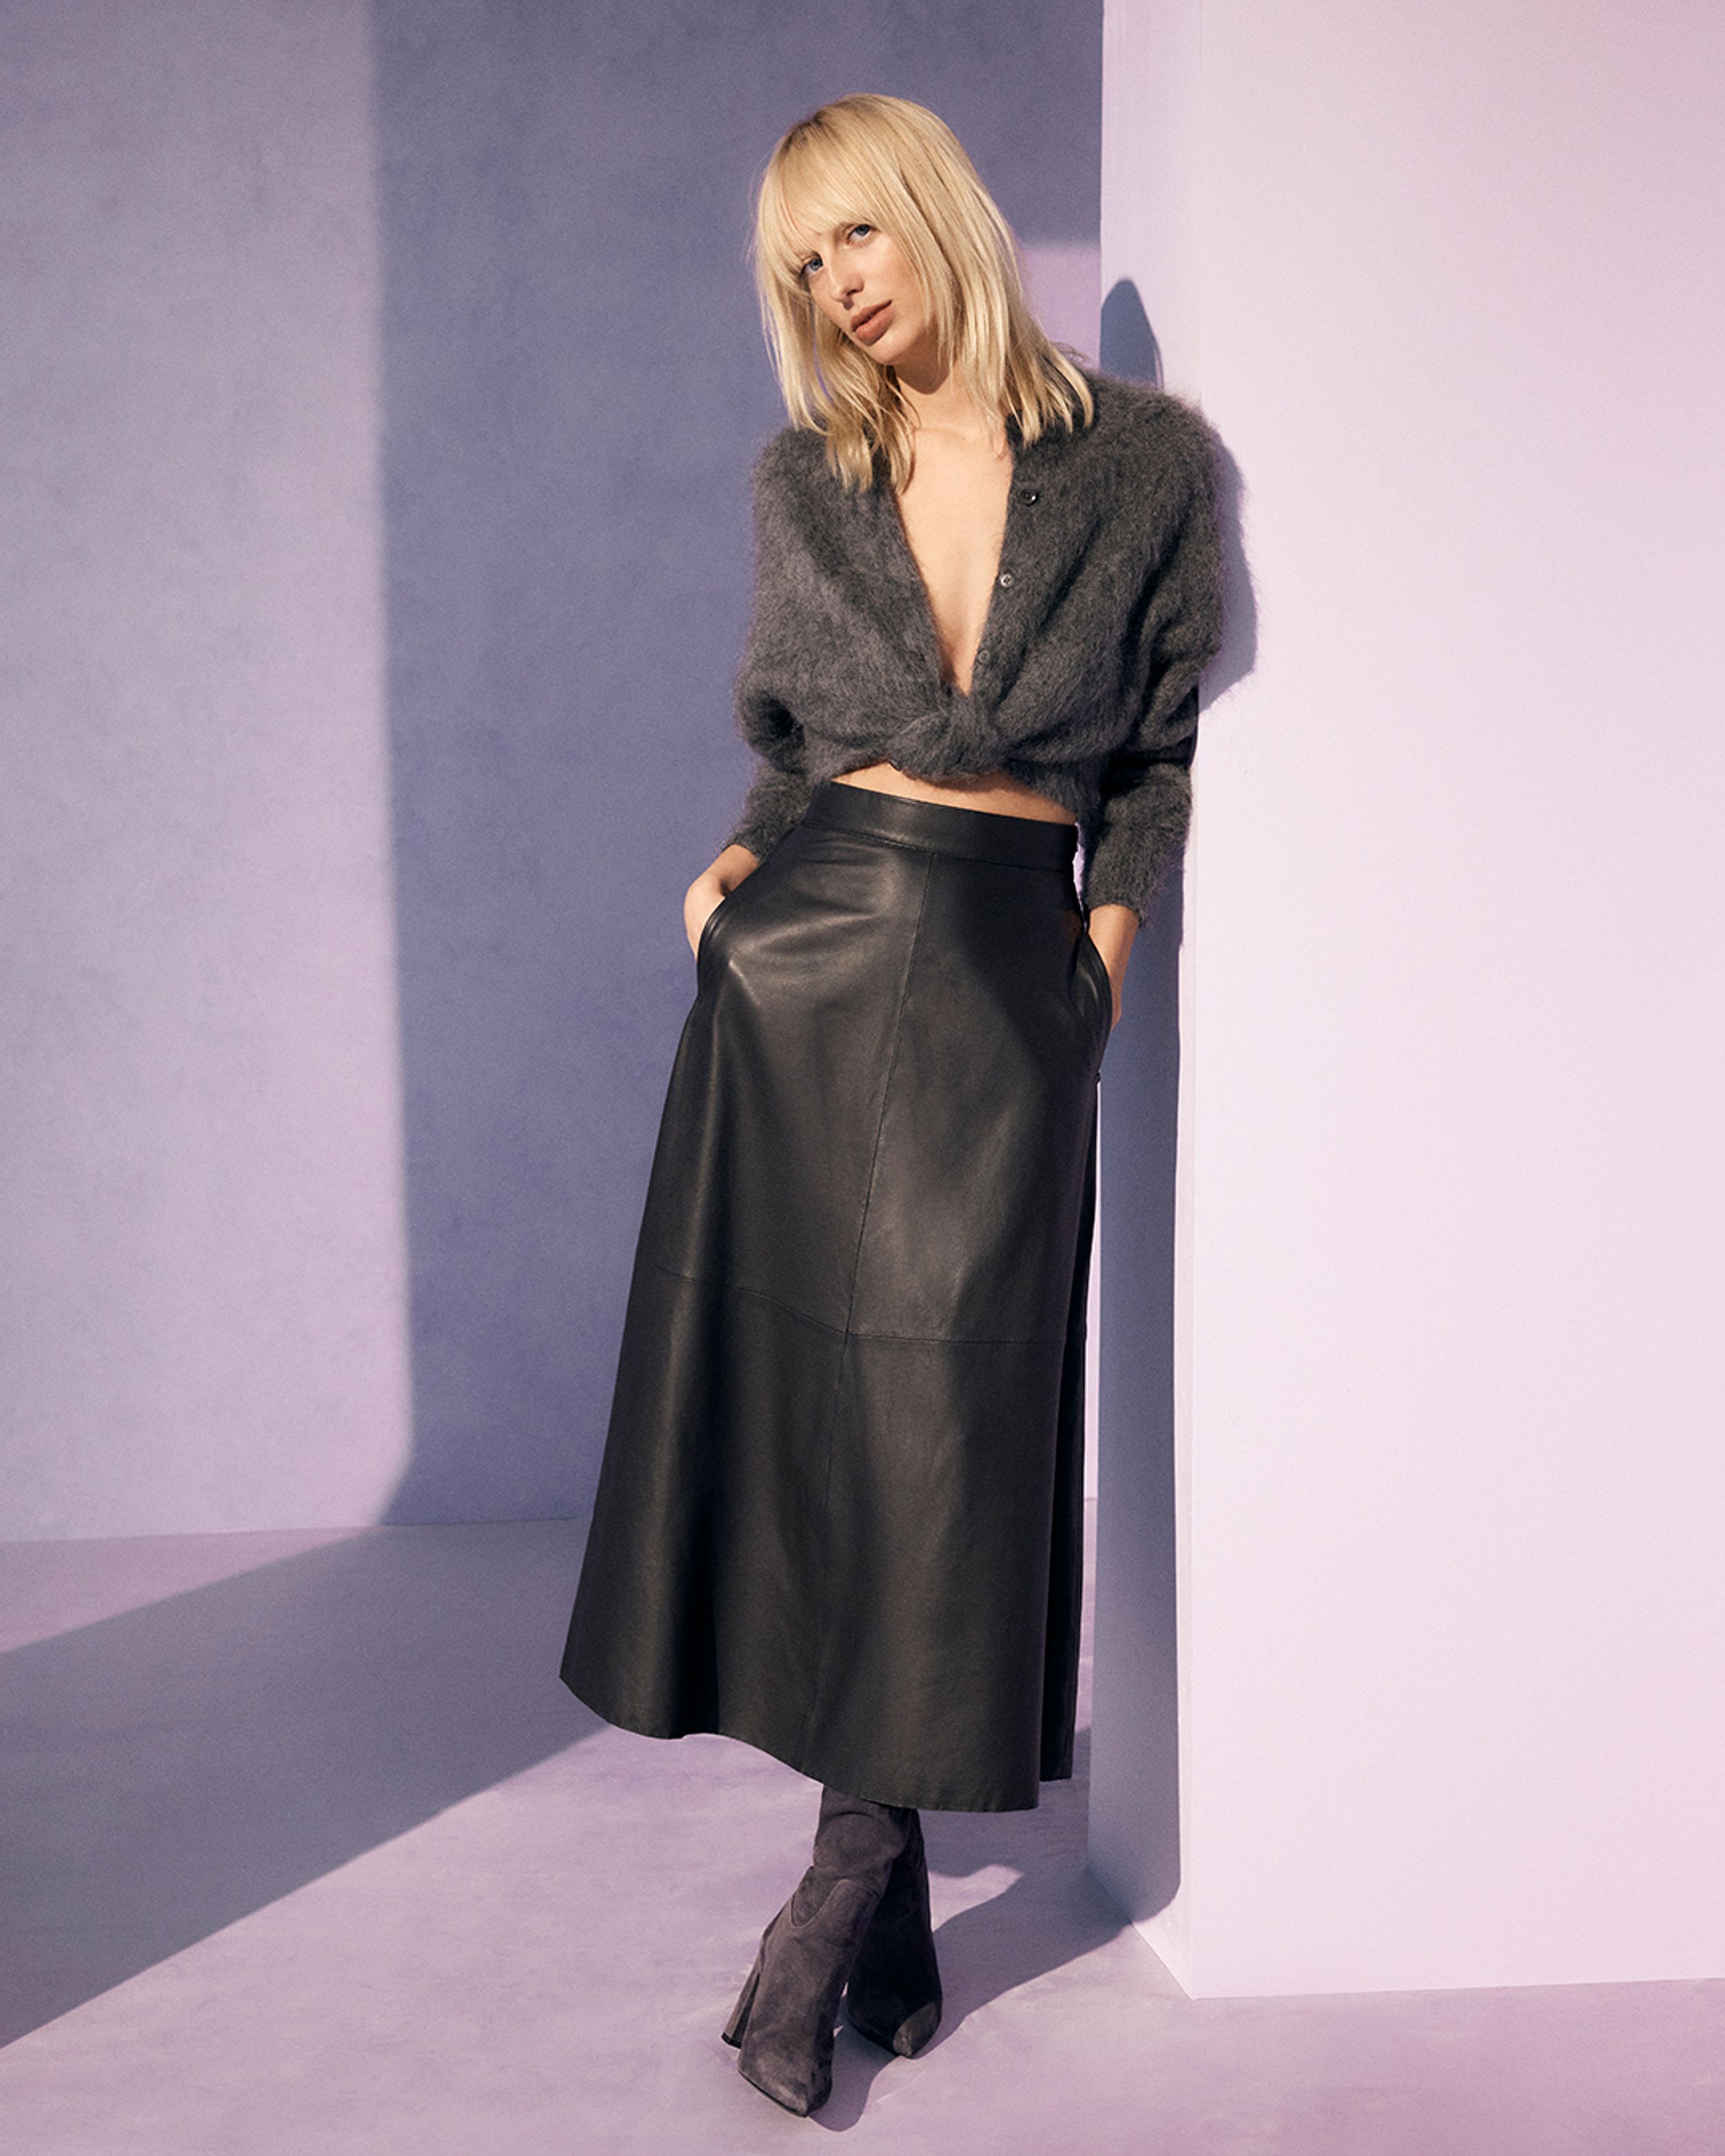 Blonde model standing wearing a grey mohair cardigan and black leather skirt